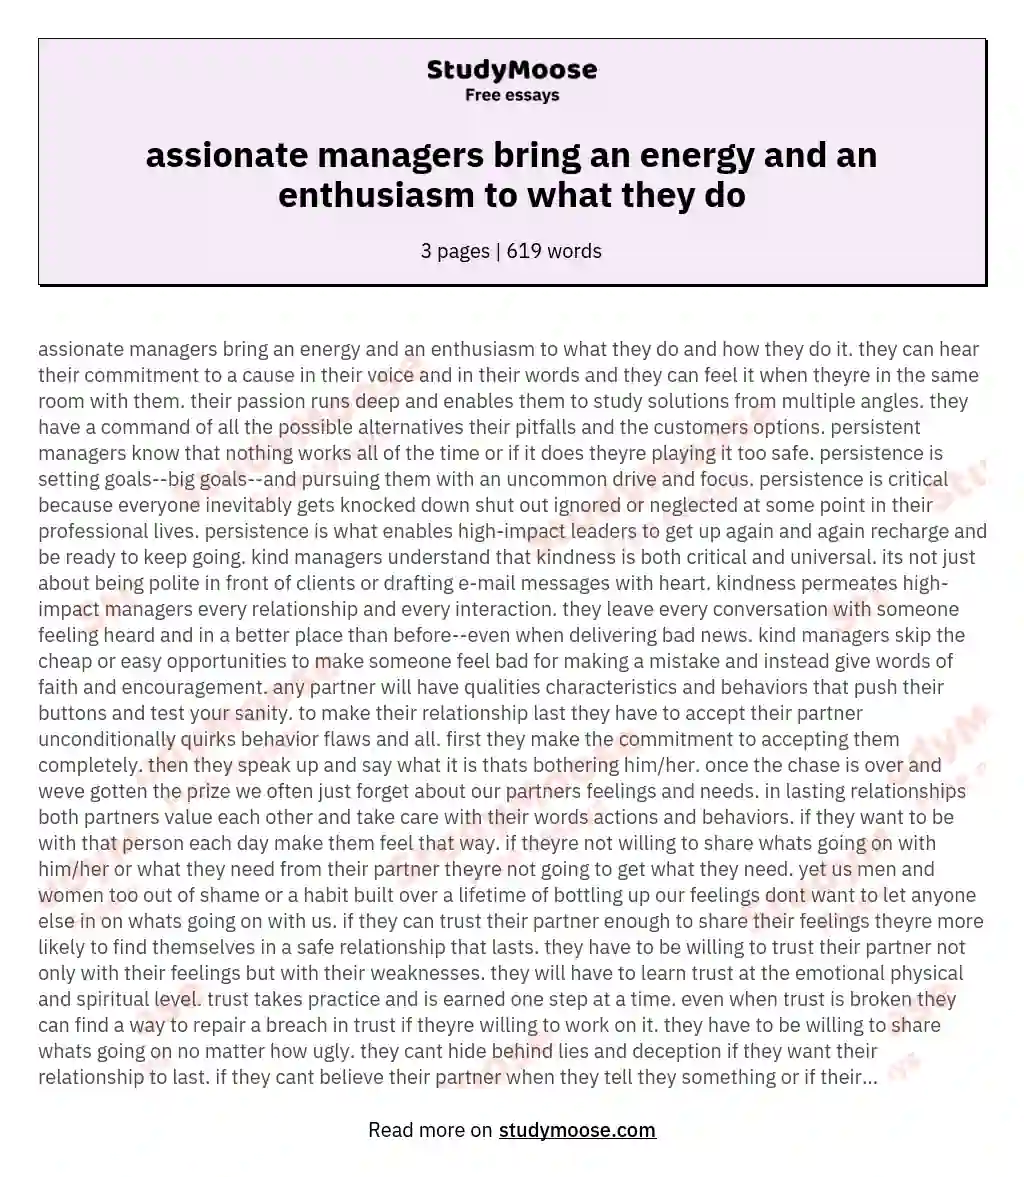 assionate managers bring an energy and an enthusiasm to what they do